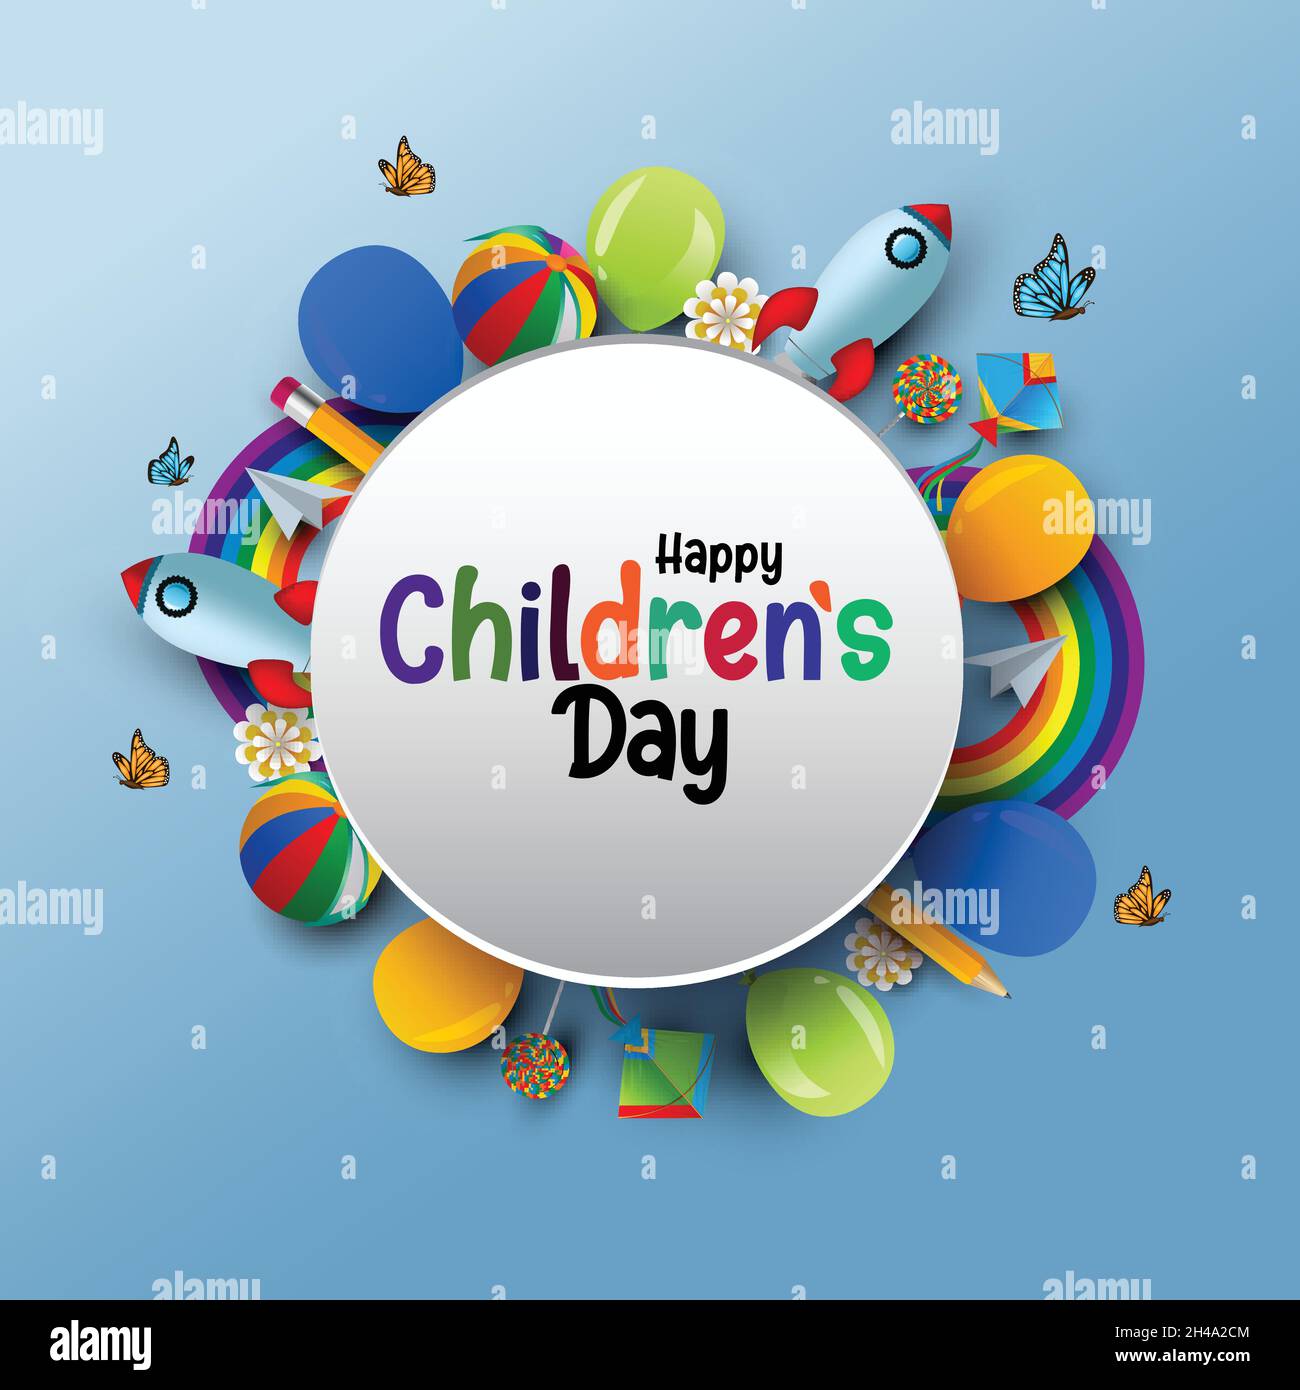 Happy children's day background greetings with kid props vector ...